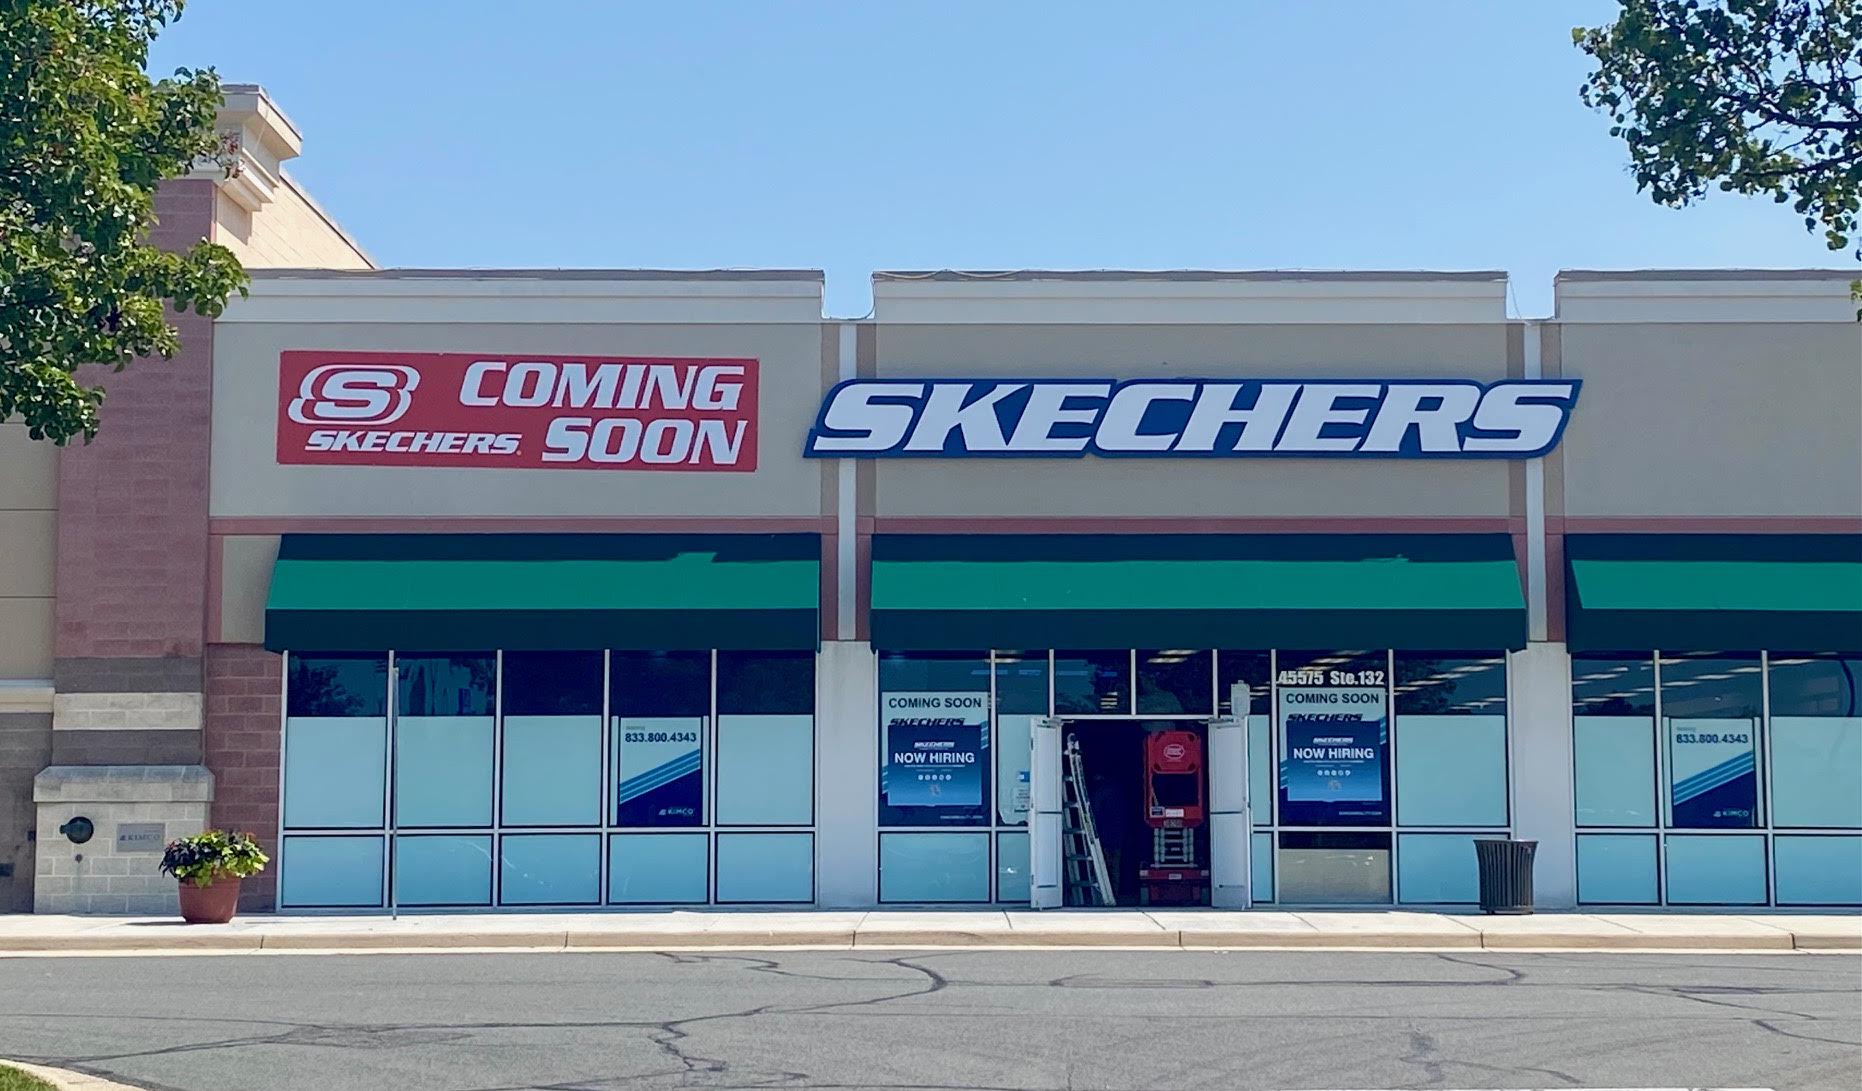 impulso Actriz Dinámica Skechers store scheduled to open in Sterling next month - The Burn